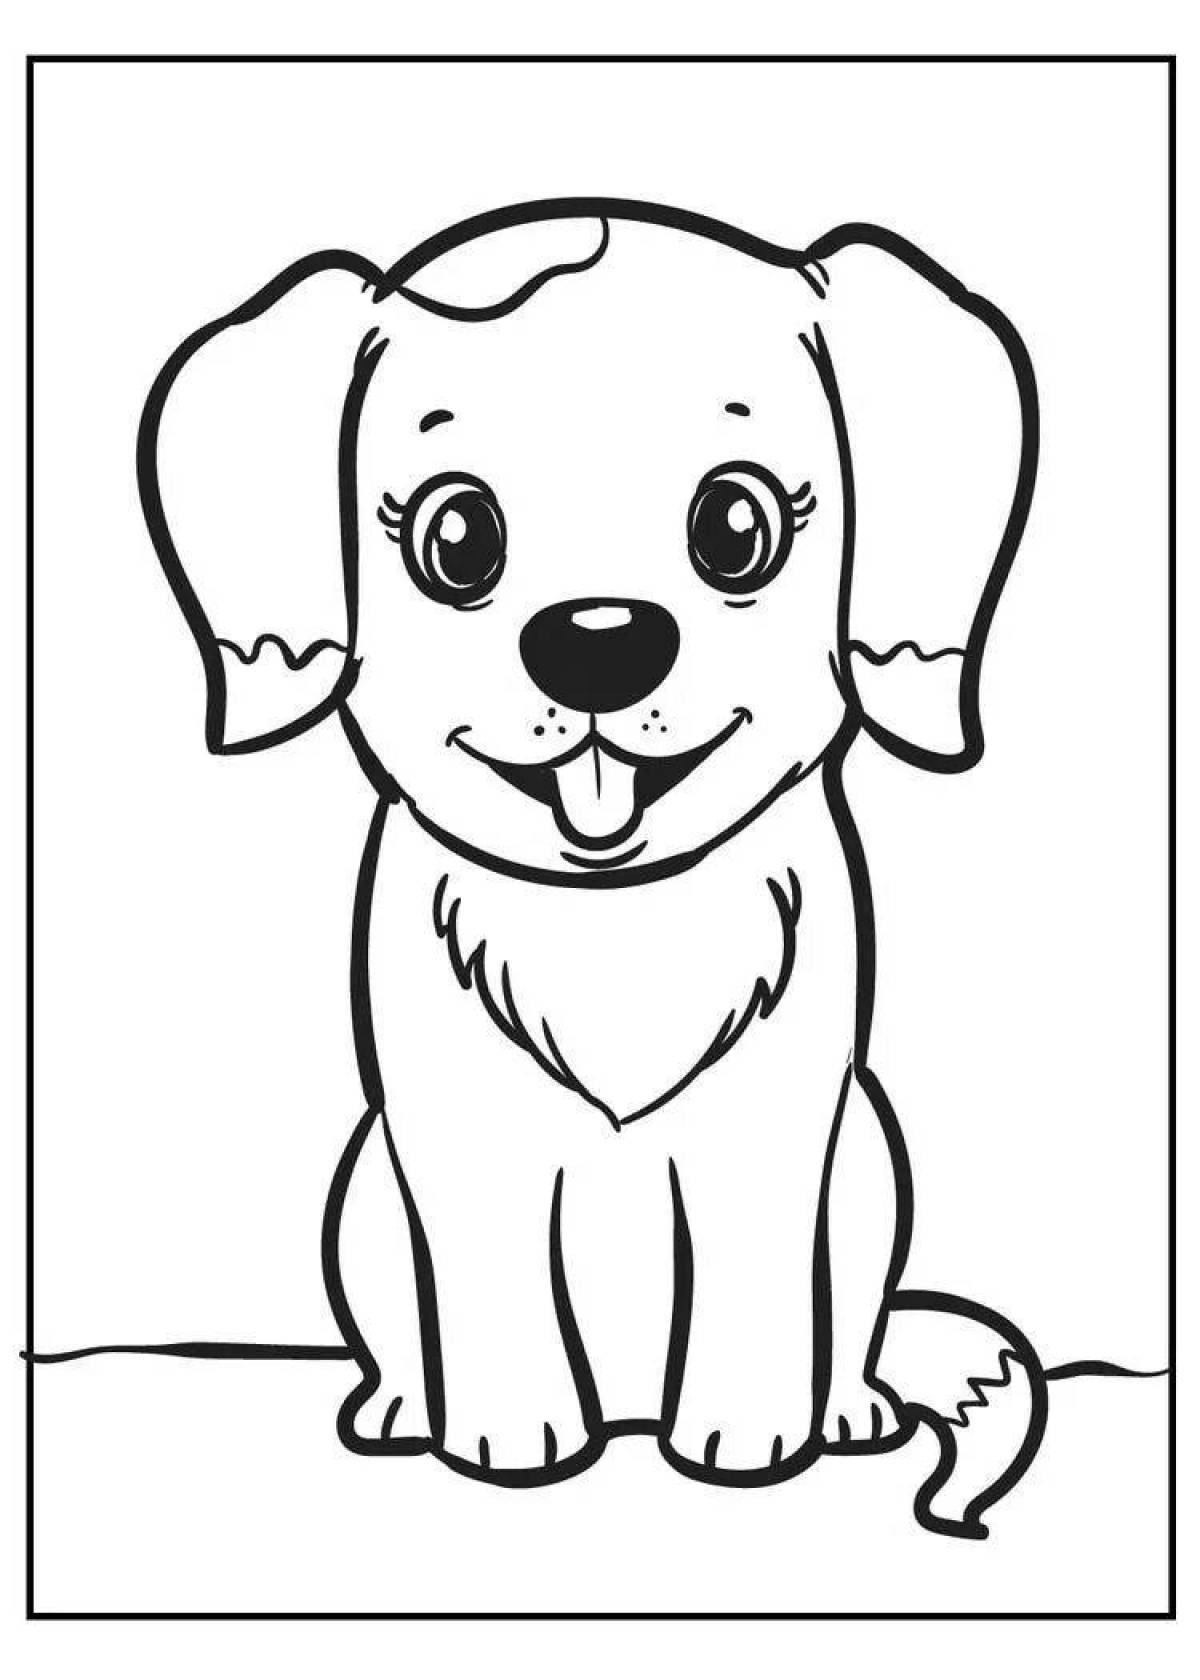 Coloring page small dog